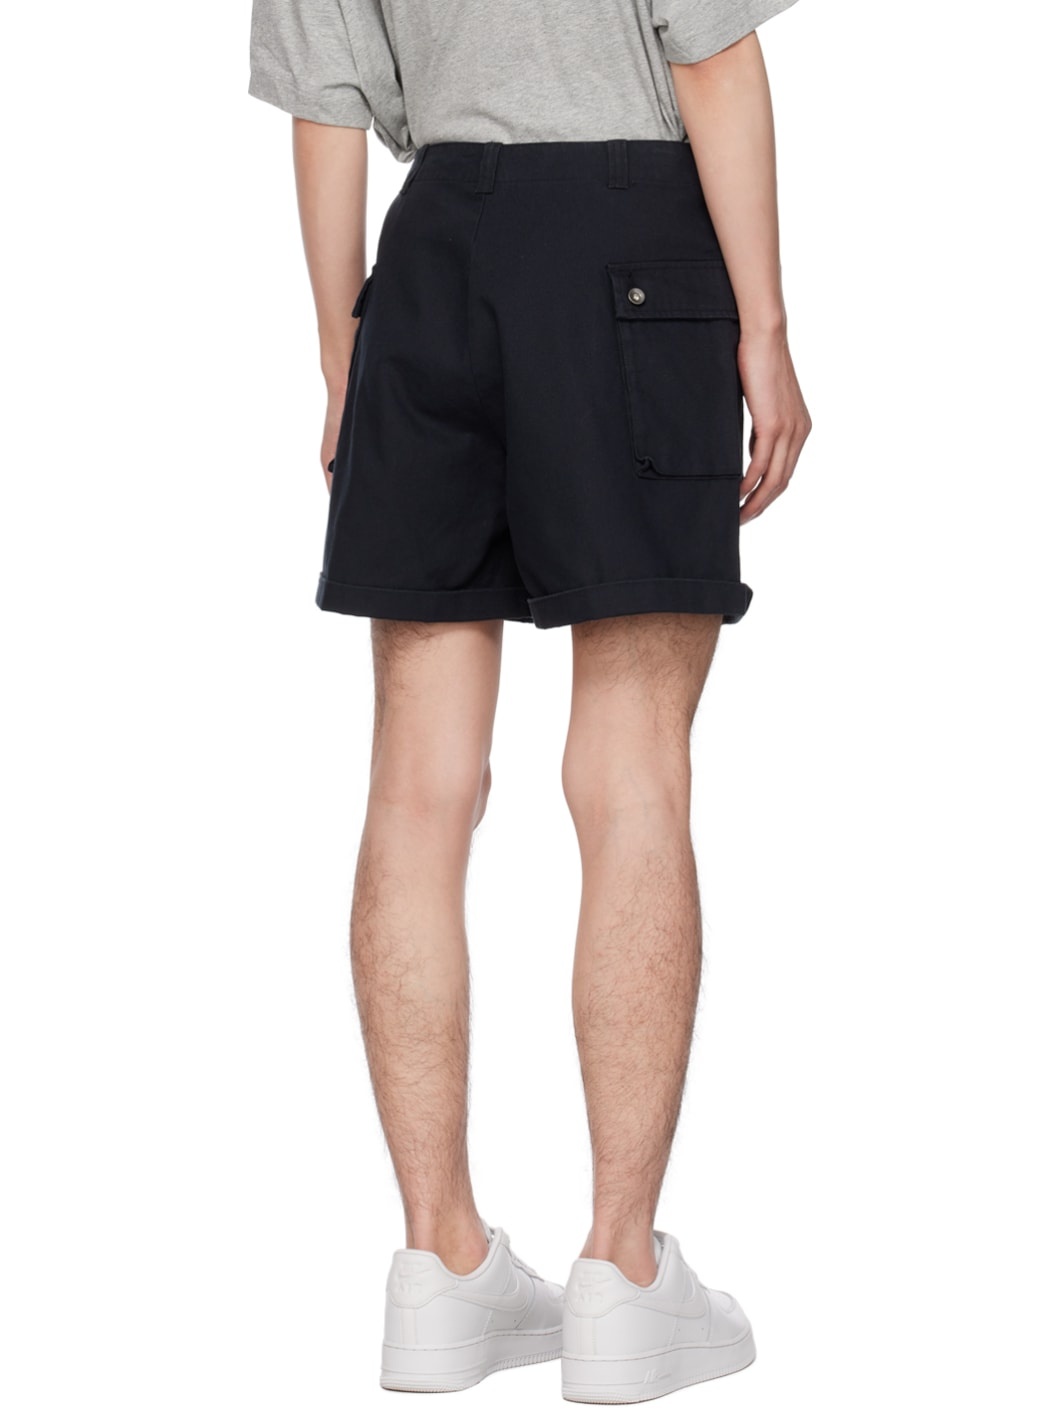 Black Embroidered Cargo Shorts - 3